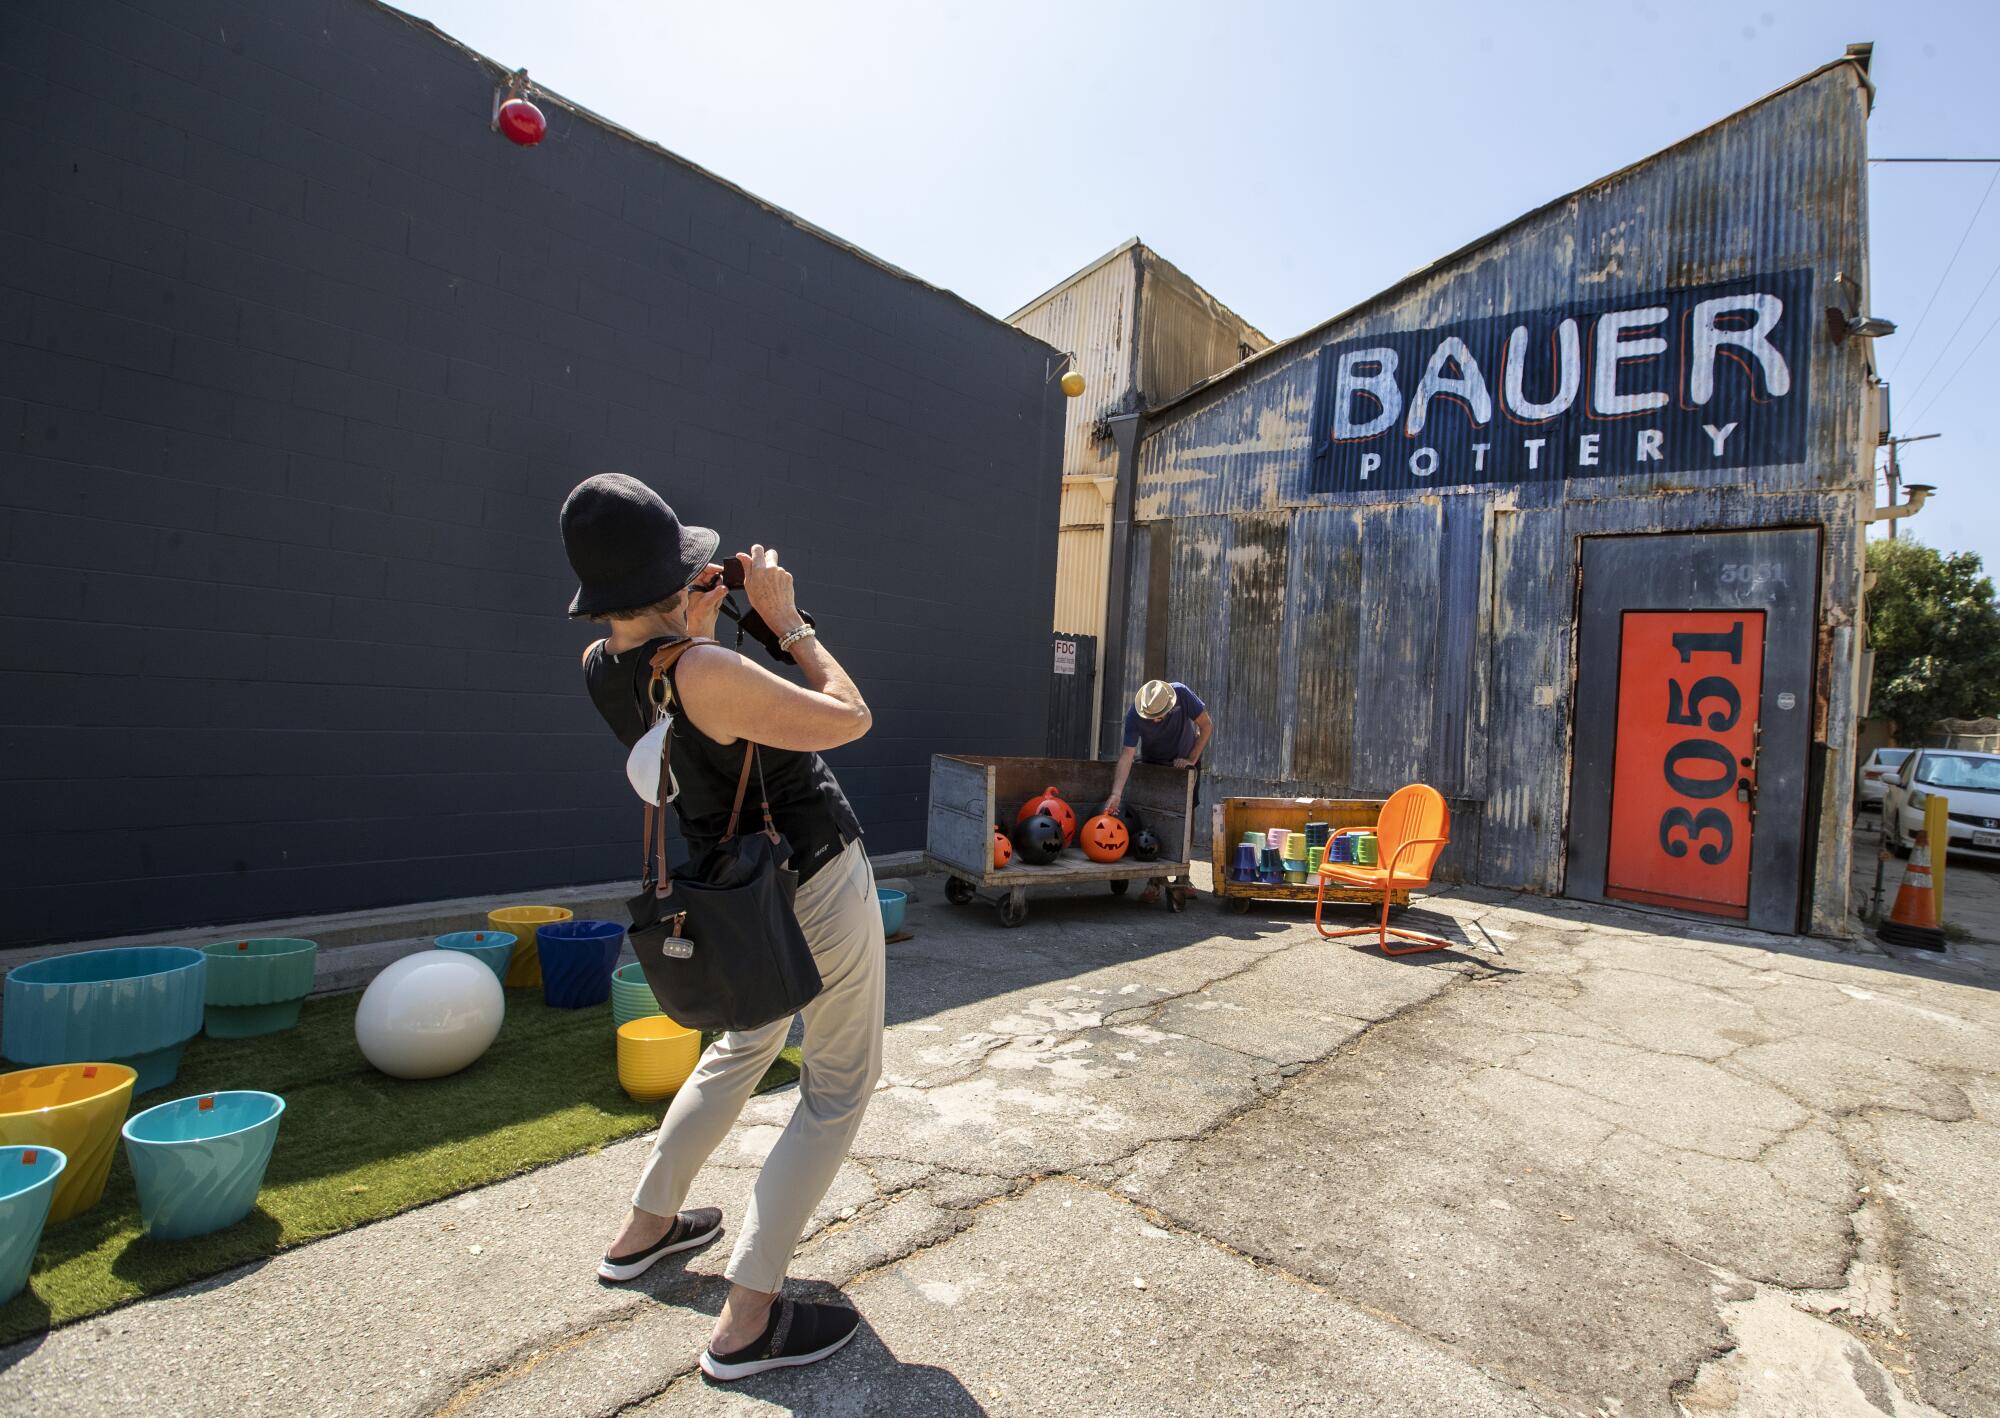 A woman takes a photo of the industrial exterior of the Bauer Pottery showroom